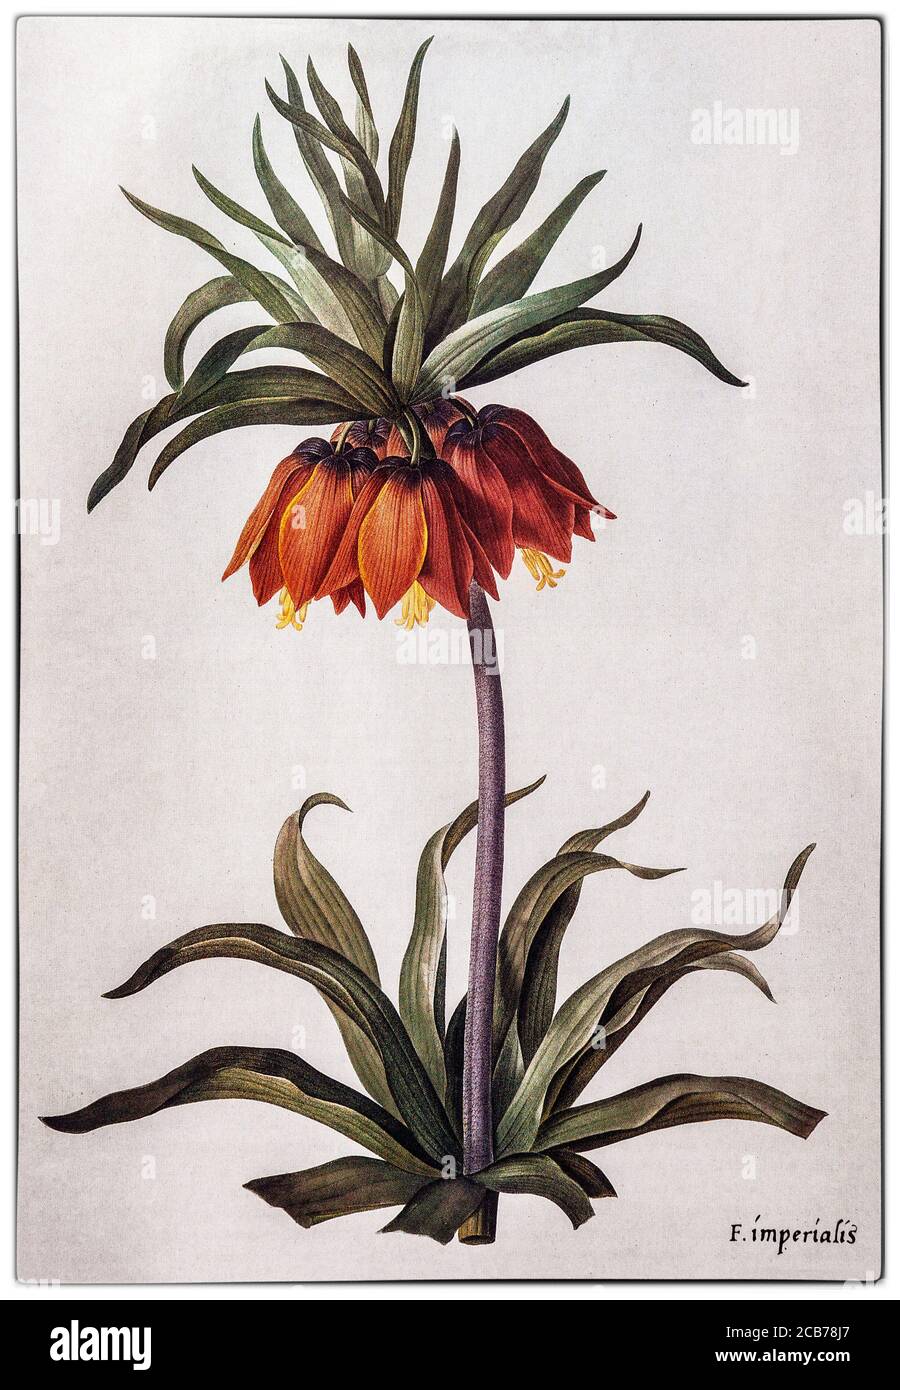 Fritillary Imperialis, aka imperial fritillary, painted by Pierre-Joseph Redouté (1759-1840), a painter and botanist from Belgium. A flowering plant in the Liliaceae family, it is native to a wide stretch from Kurdistan across the plateau of Turkey, Iraq and Iran to Afghanistan, Pakistan, Northern India and the Himalayan foothills and  widely cultivated as an ornamental plant. Stock Photo